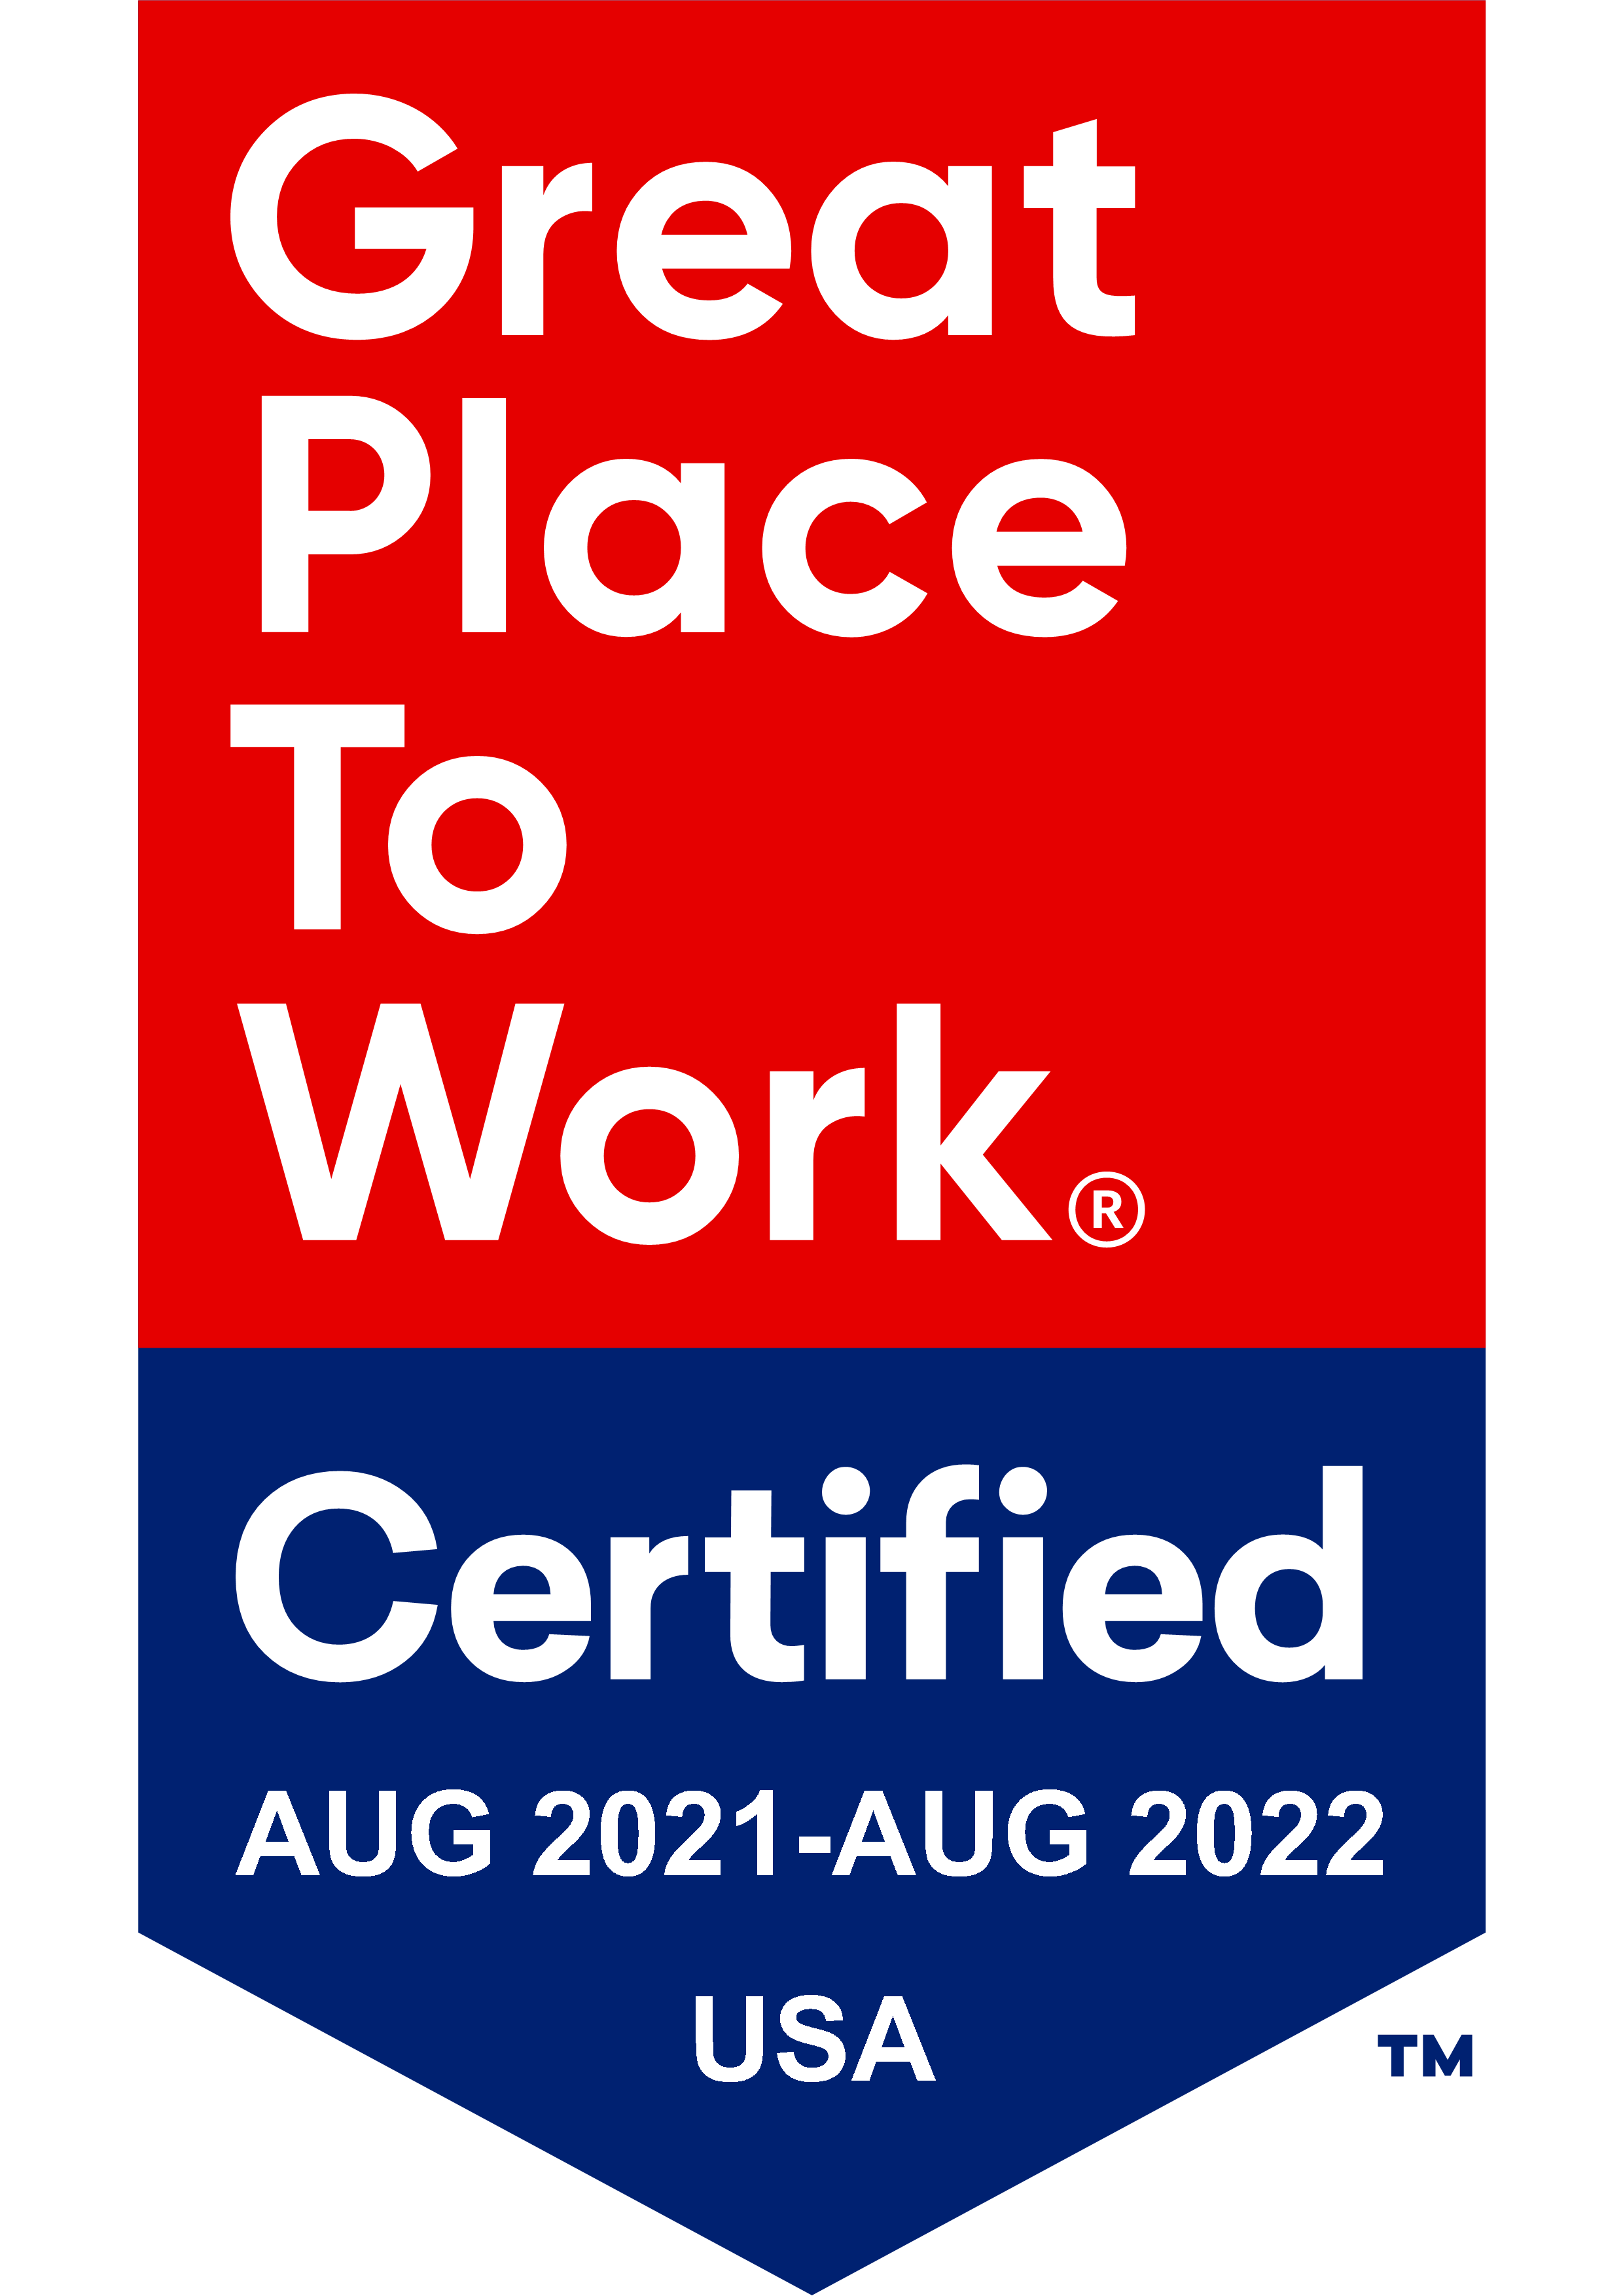 Great Place to Work Certified Logo